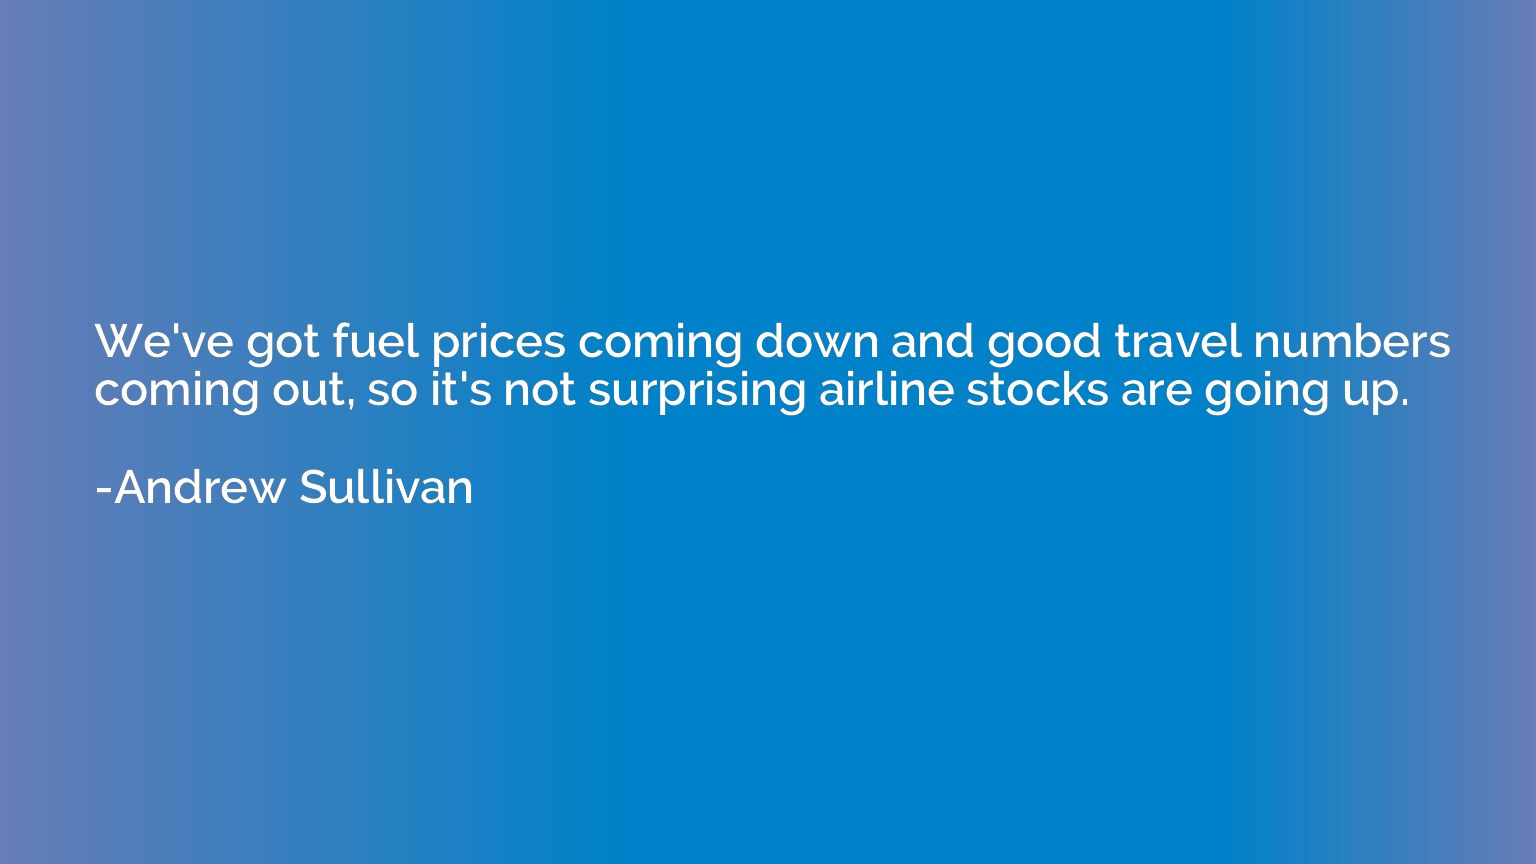 We've got fuel prices coming down and good travel numbers co